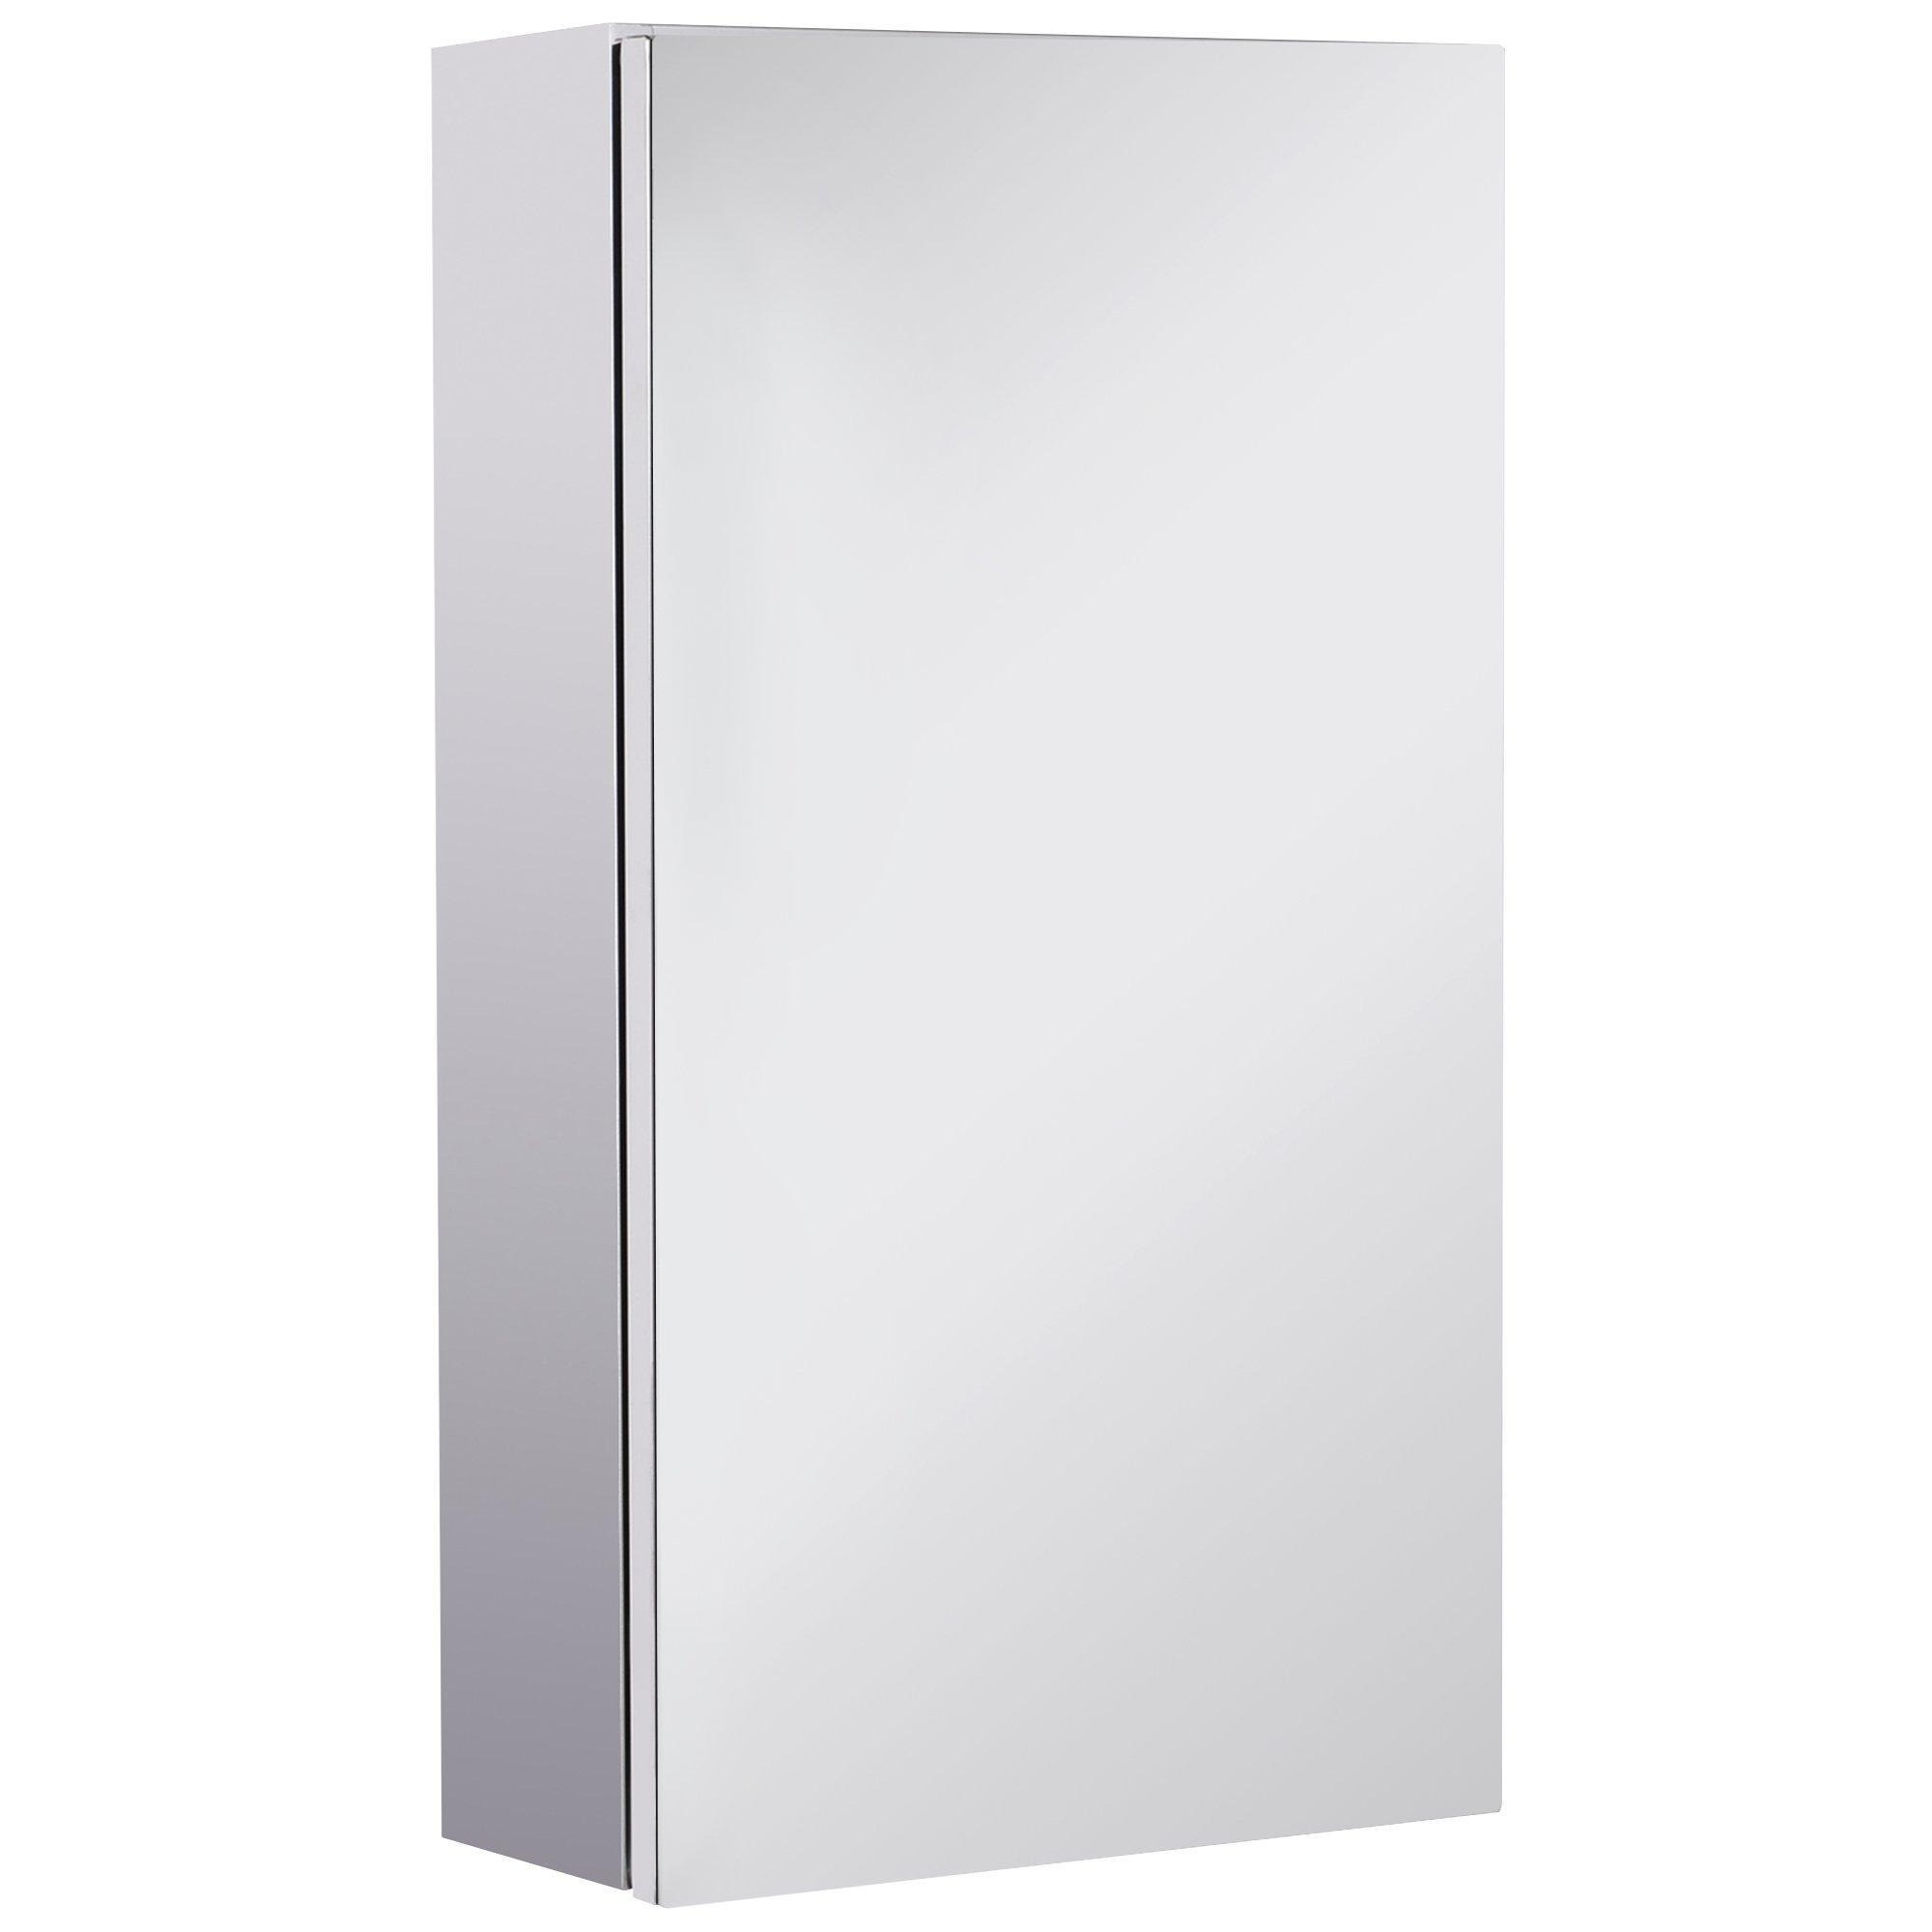 Stainless Steel Wall-mounted Bathroom Mirror Storage Cabinet 300mm (W) - image 1